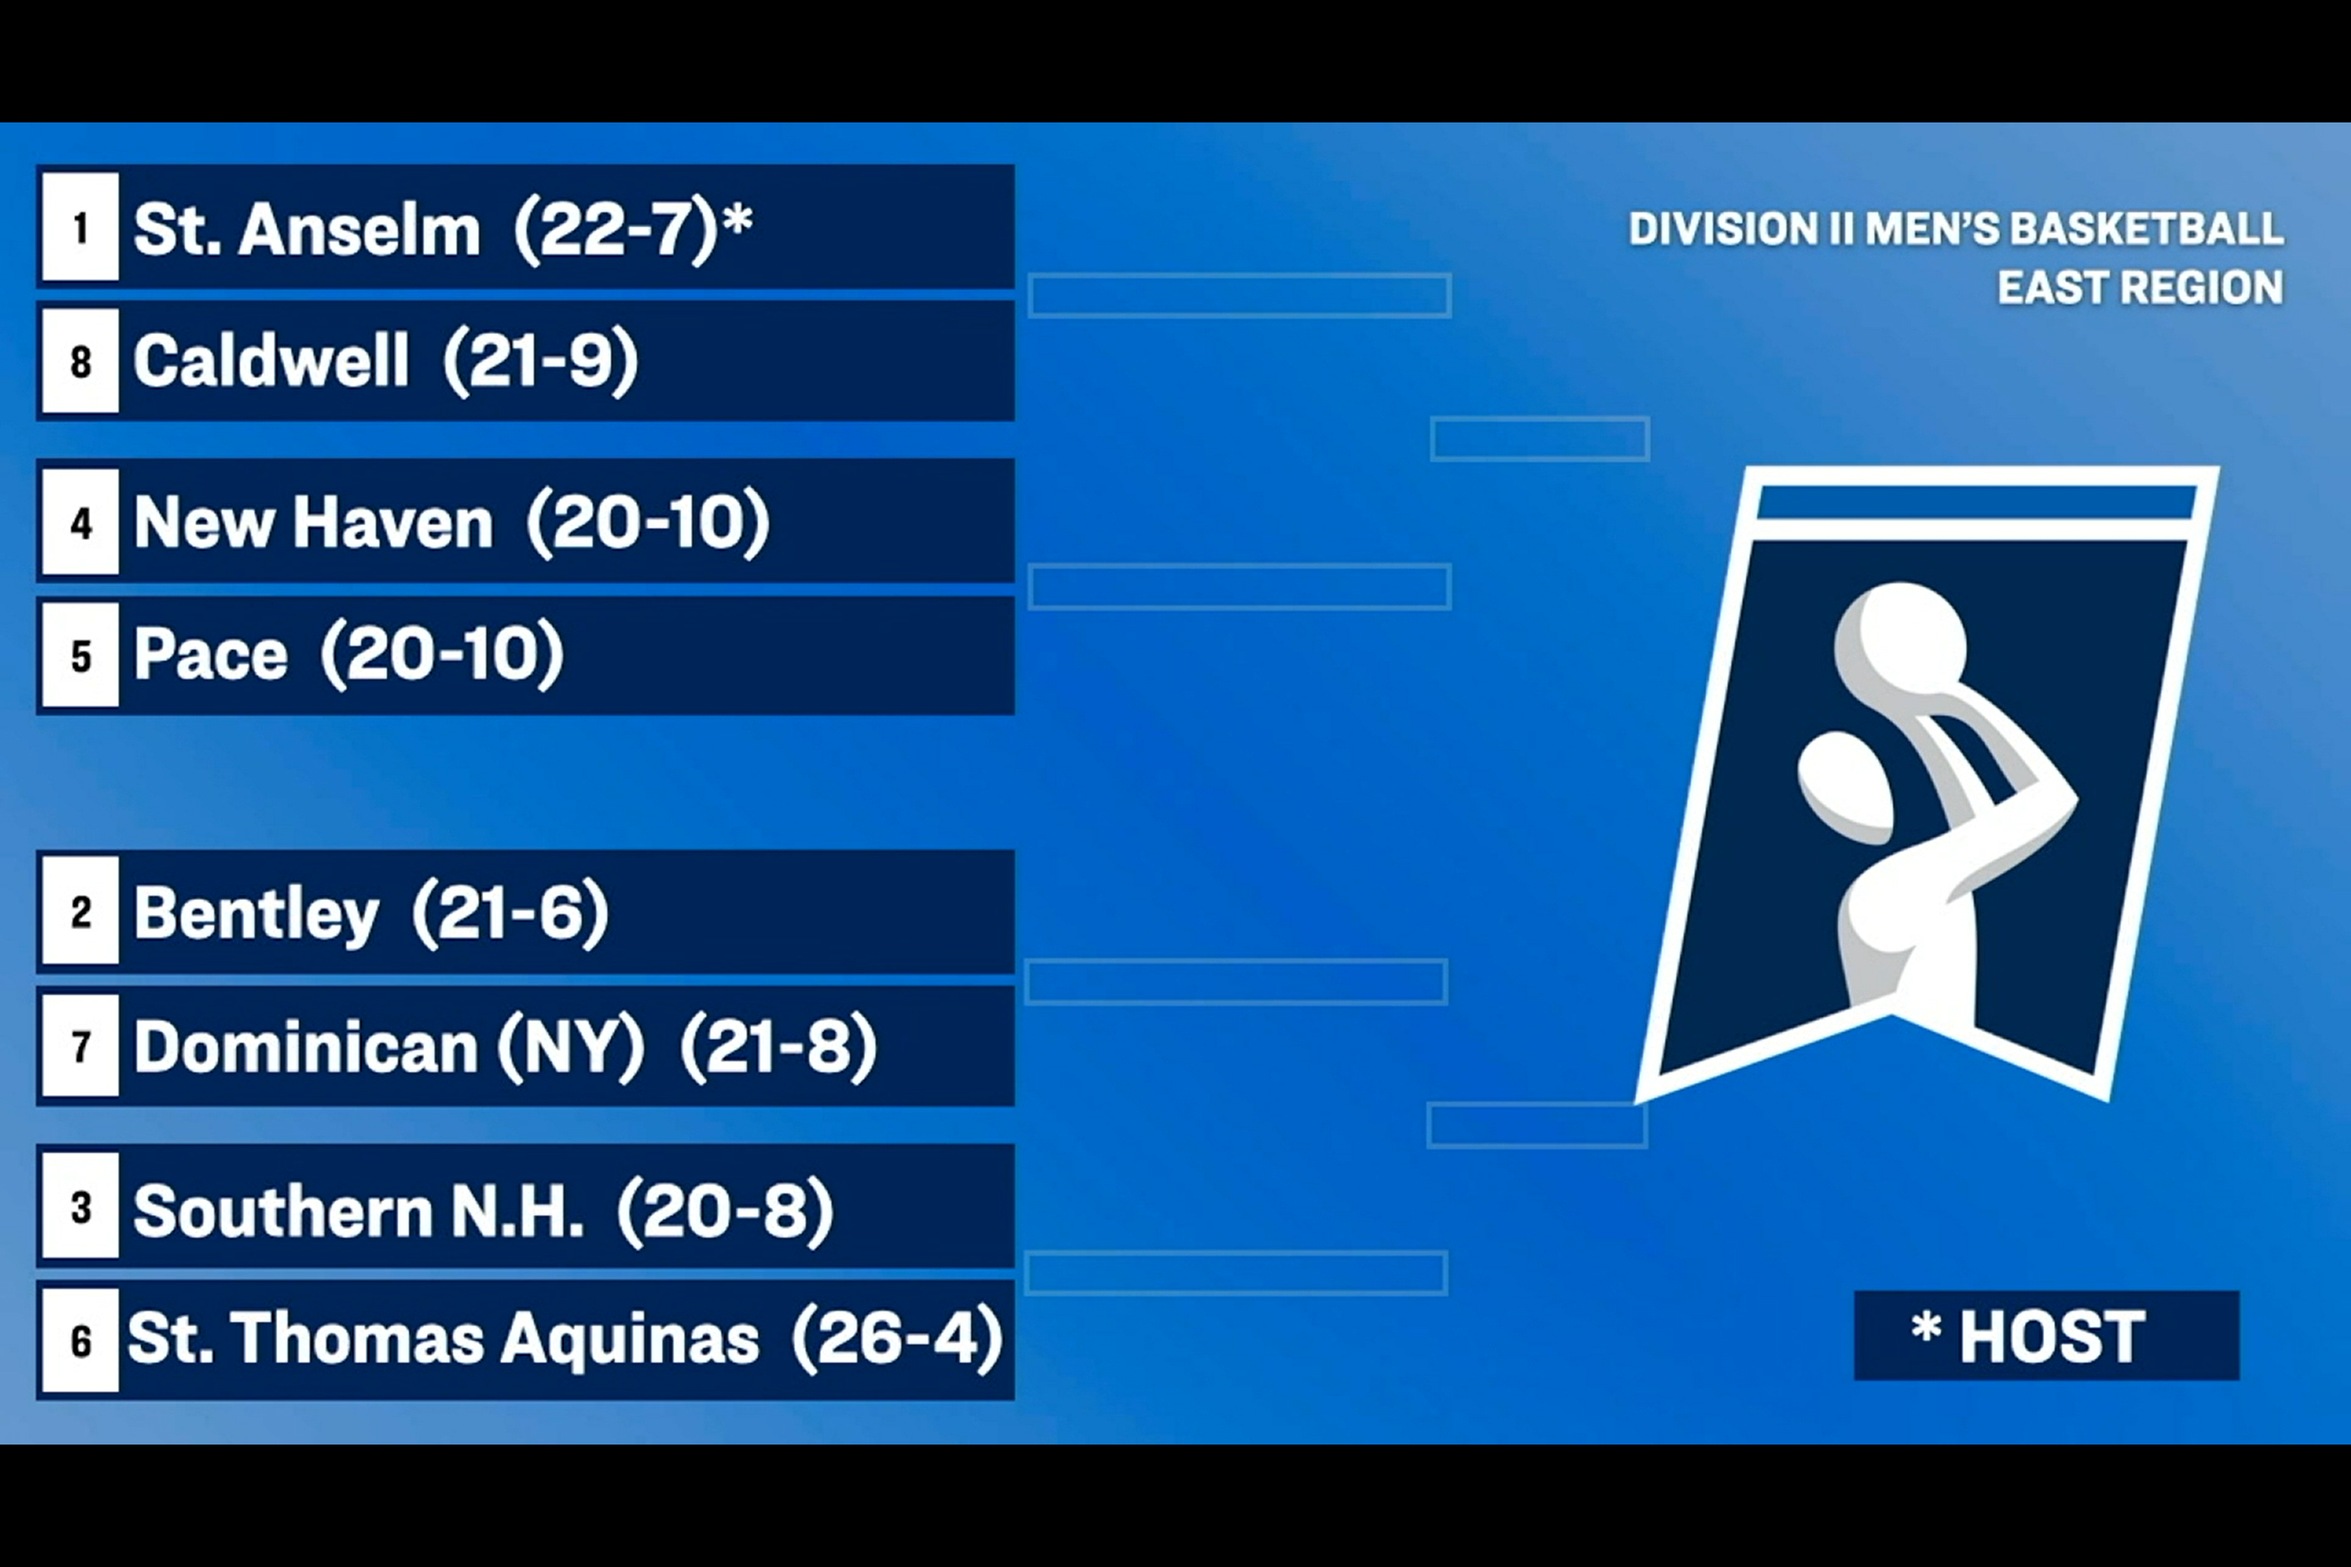 #7 CHARGERS FACE OFF AGAINST #2 BENTLEY UNIVERSITY IN EAST REGIONAL QUARTERS